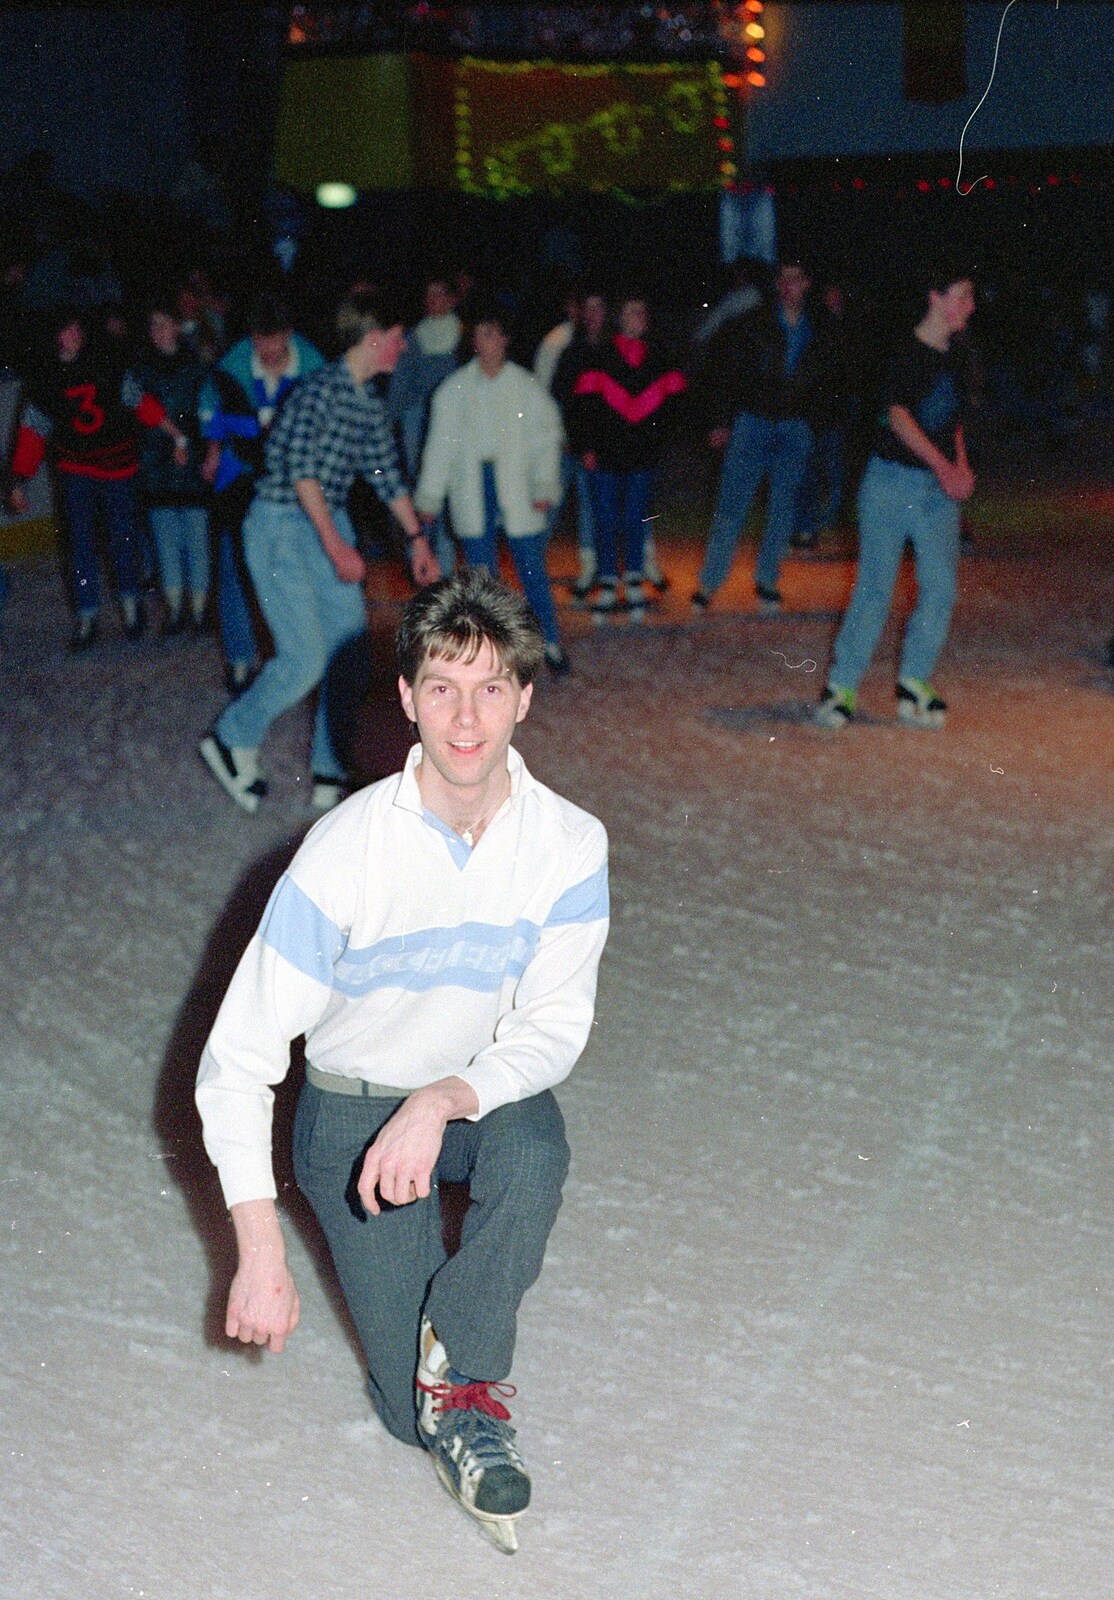 The Vineyard, Christchurch and Pizza, New Milton and the New Forest - 2nd April 1989: Sean poses on the ice at Westover Ice Rink, Bournemouth